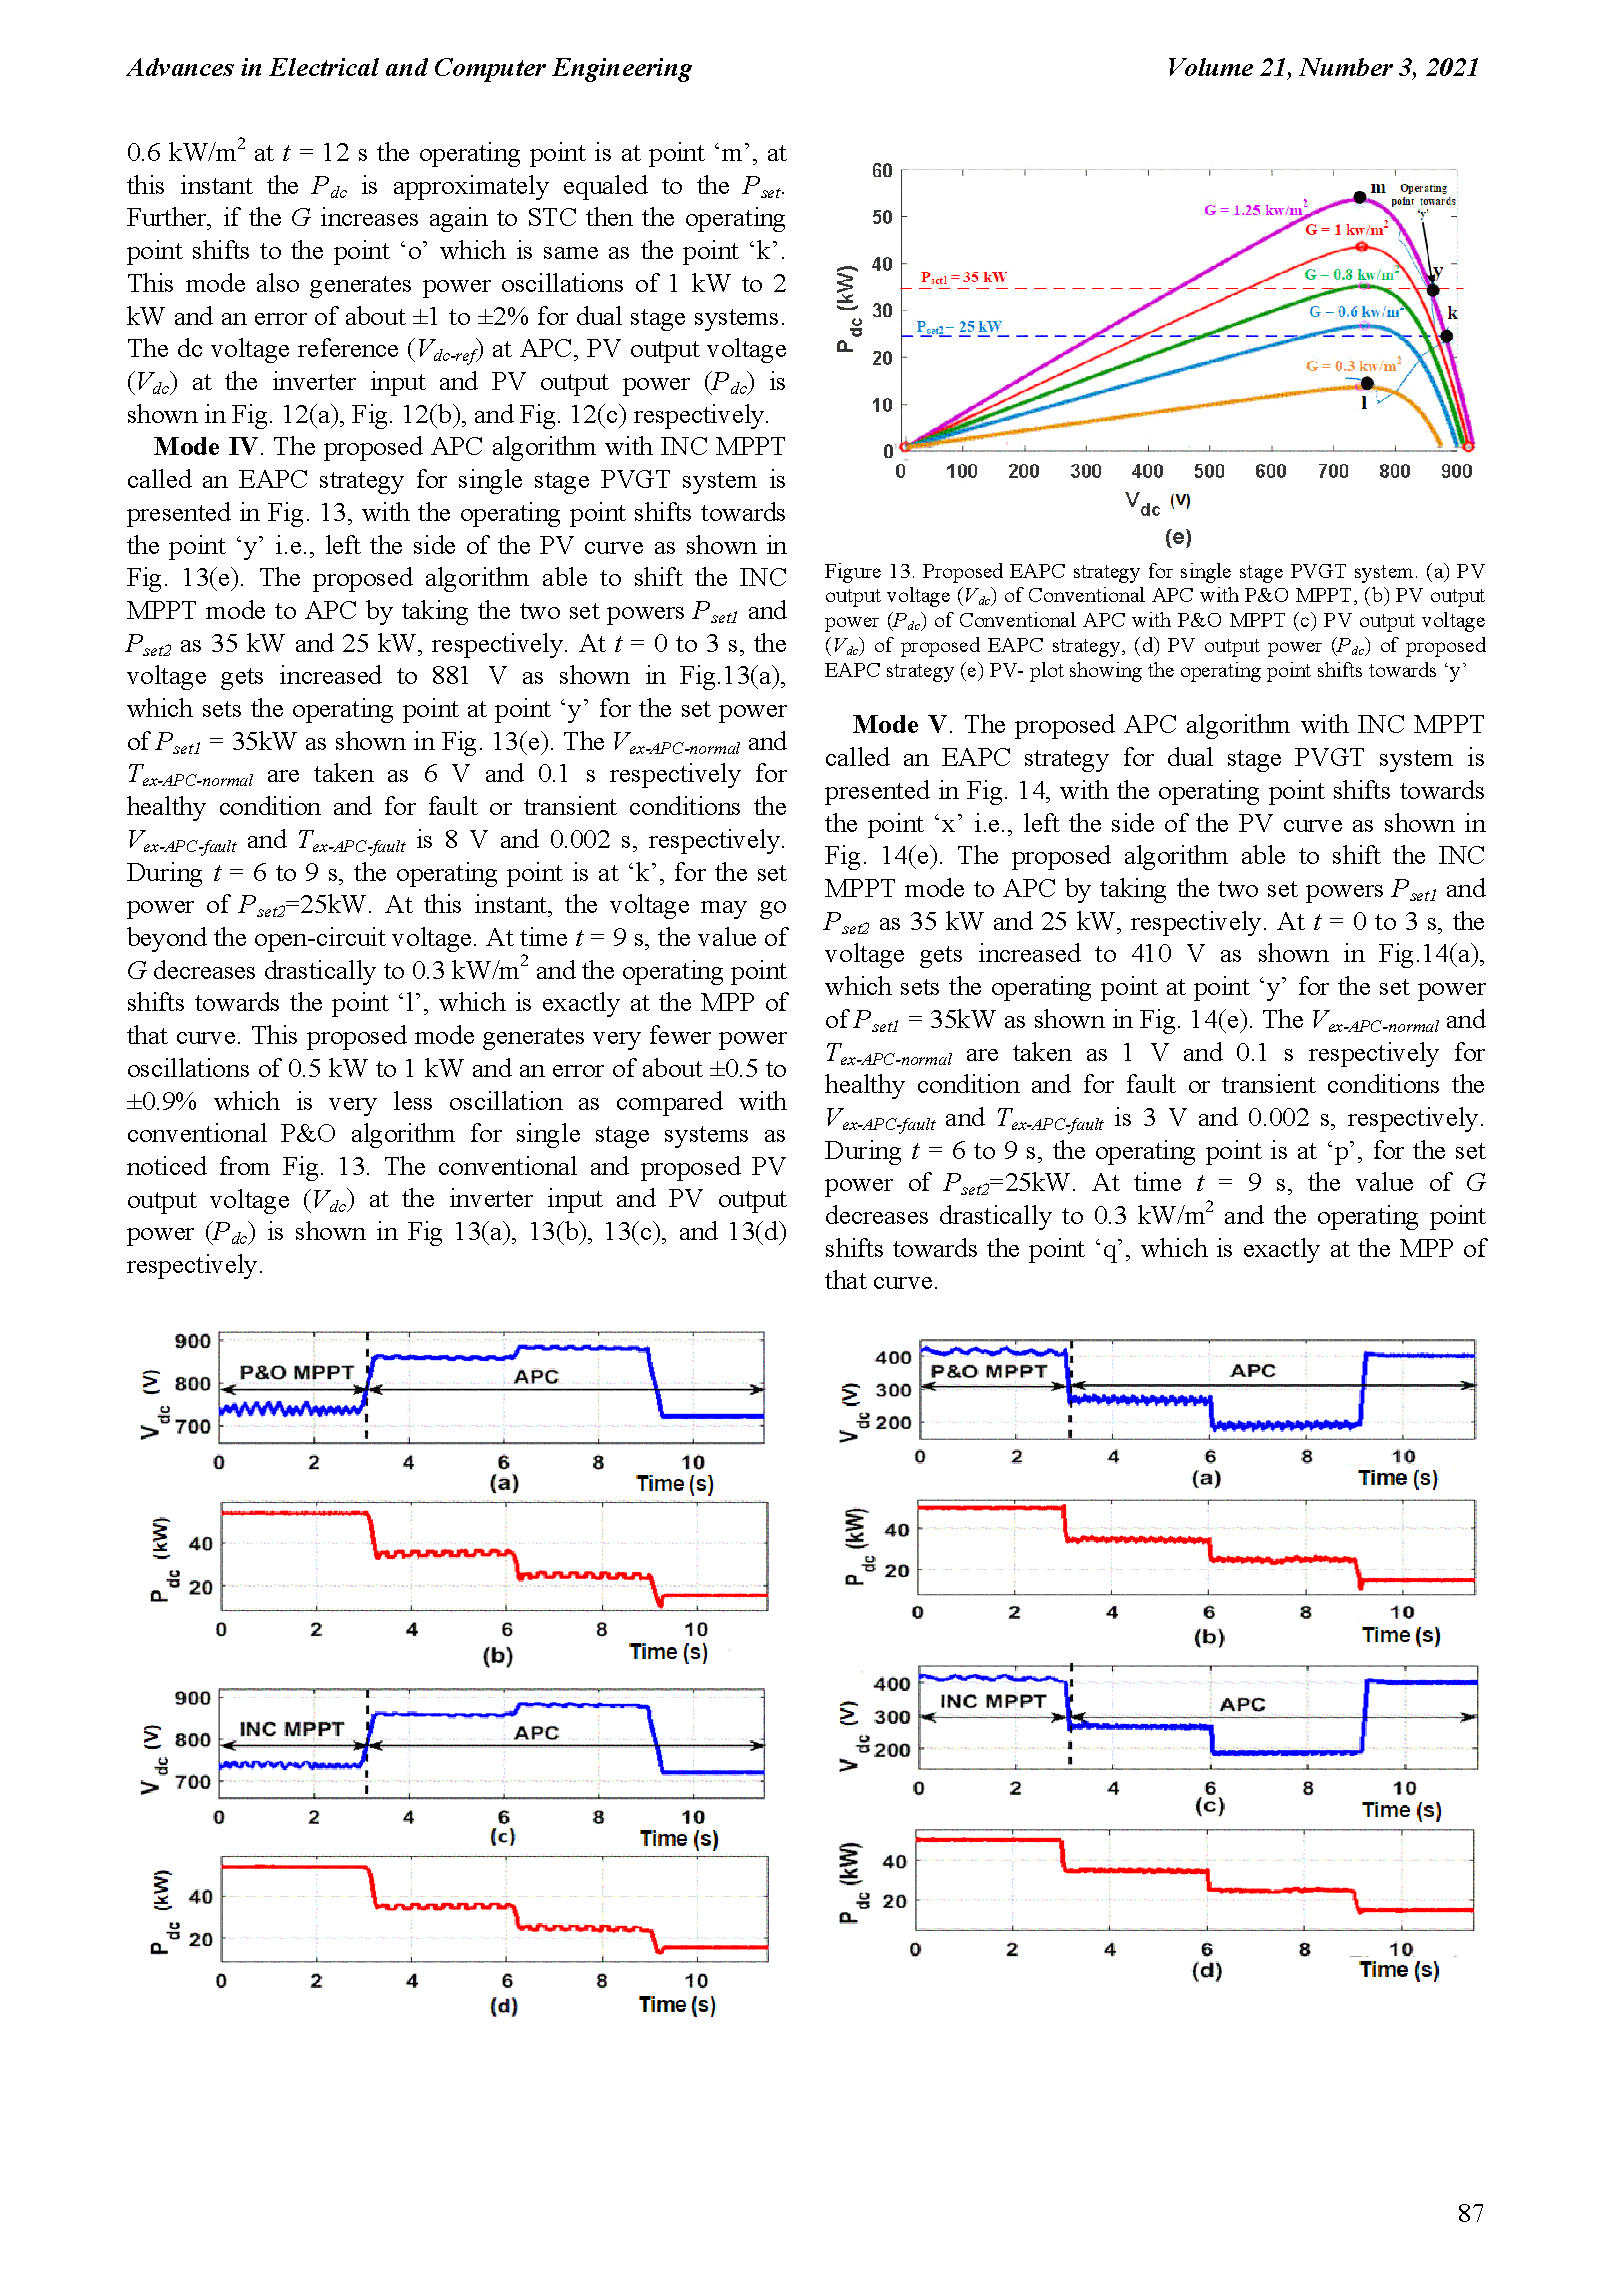 PDF Quickview for paper with DOI:10.4316/AECE.2021.03010